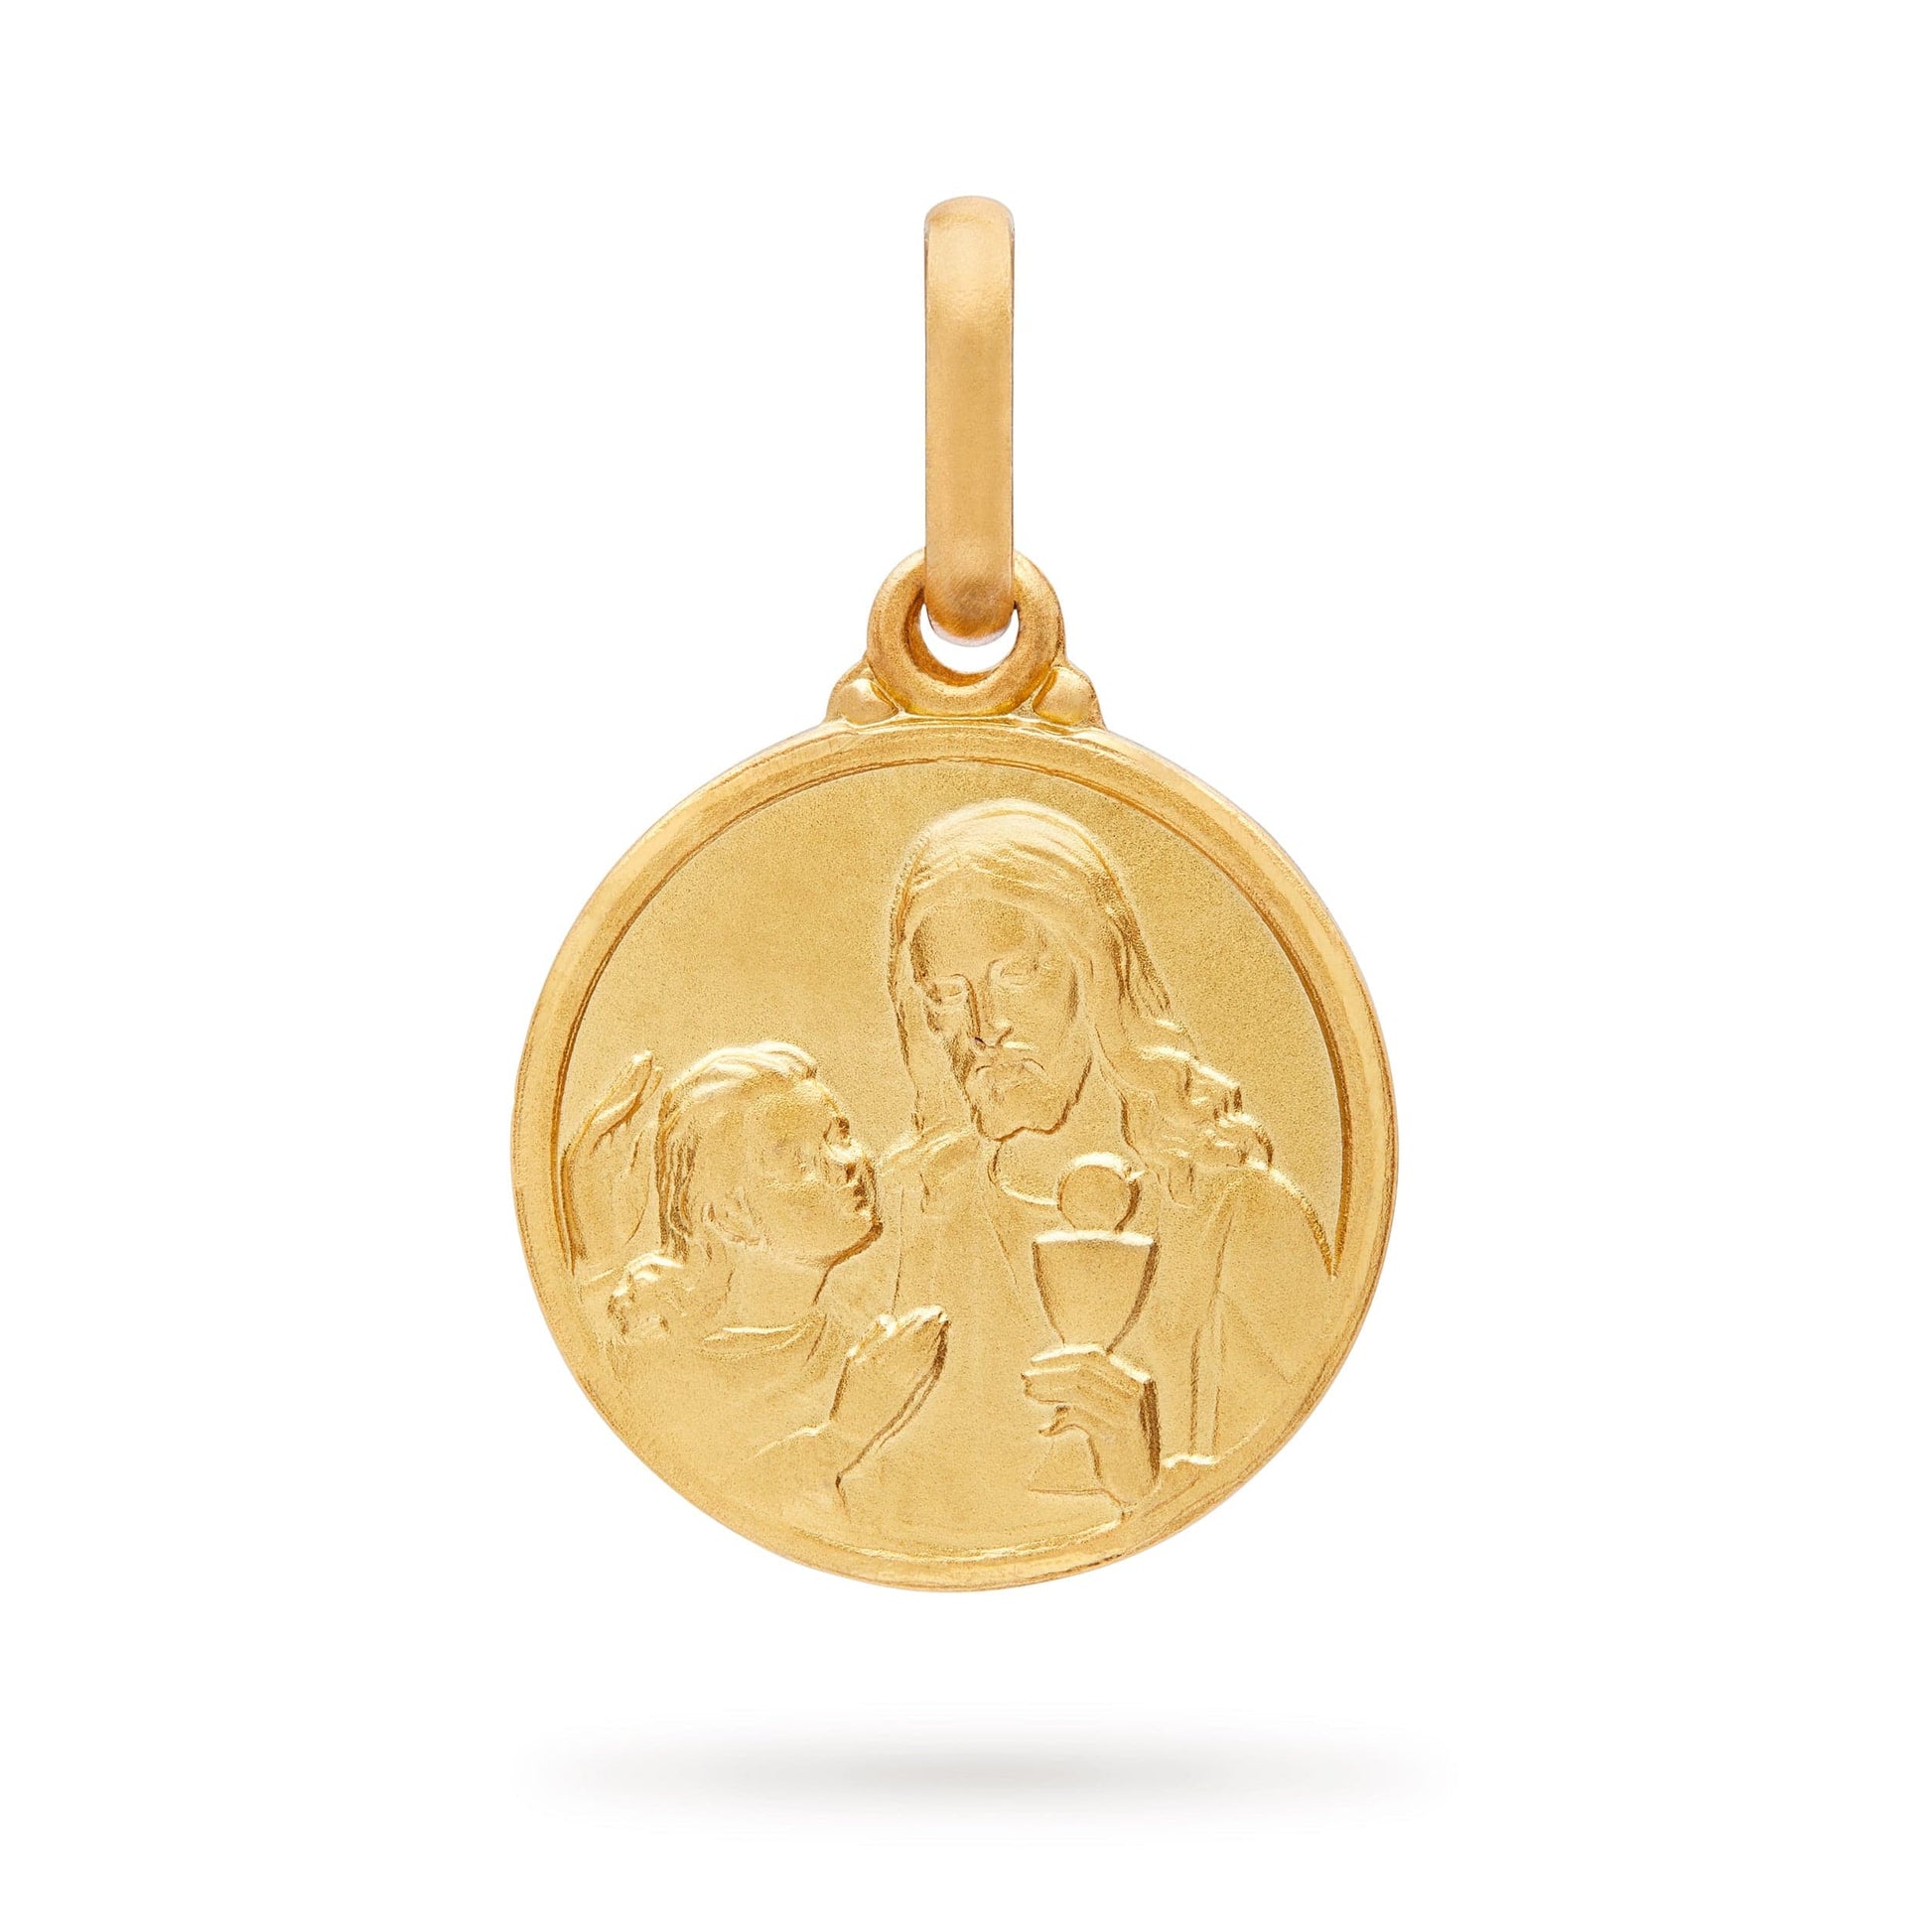 MONDO CATTOLICO Jewelry 14 mm (0.55 in) First Communion Gold Medal